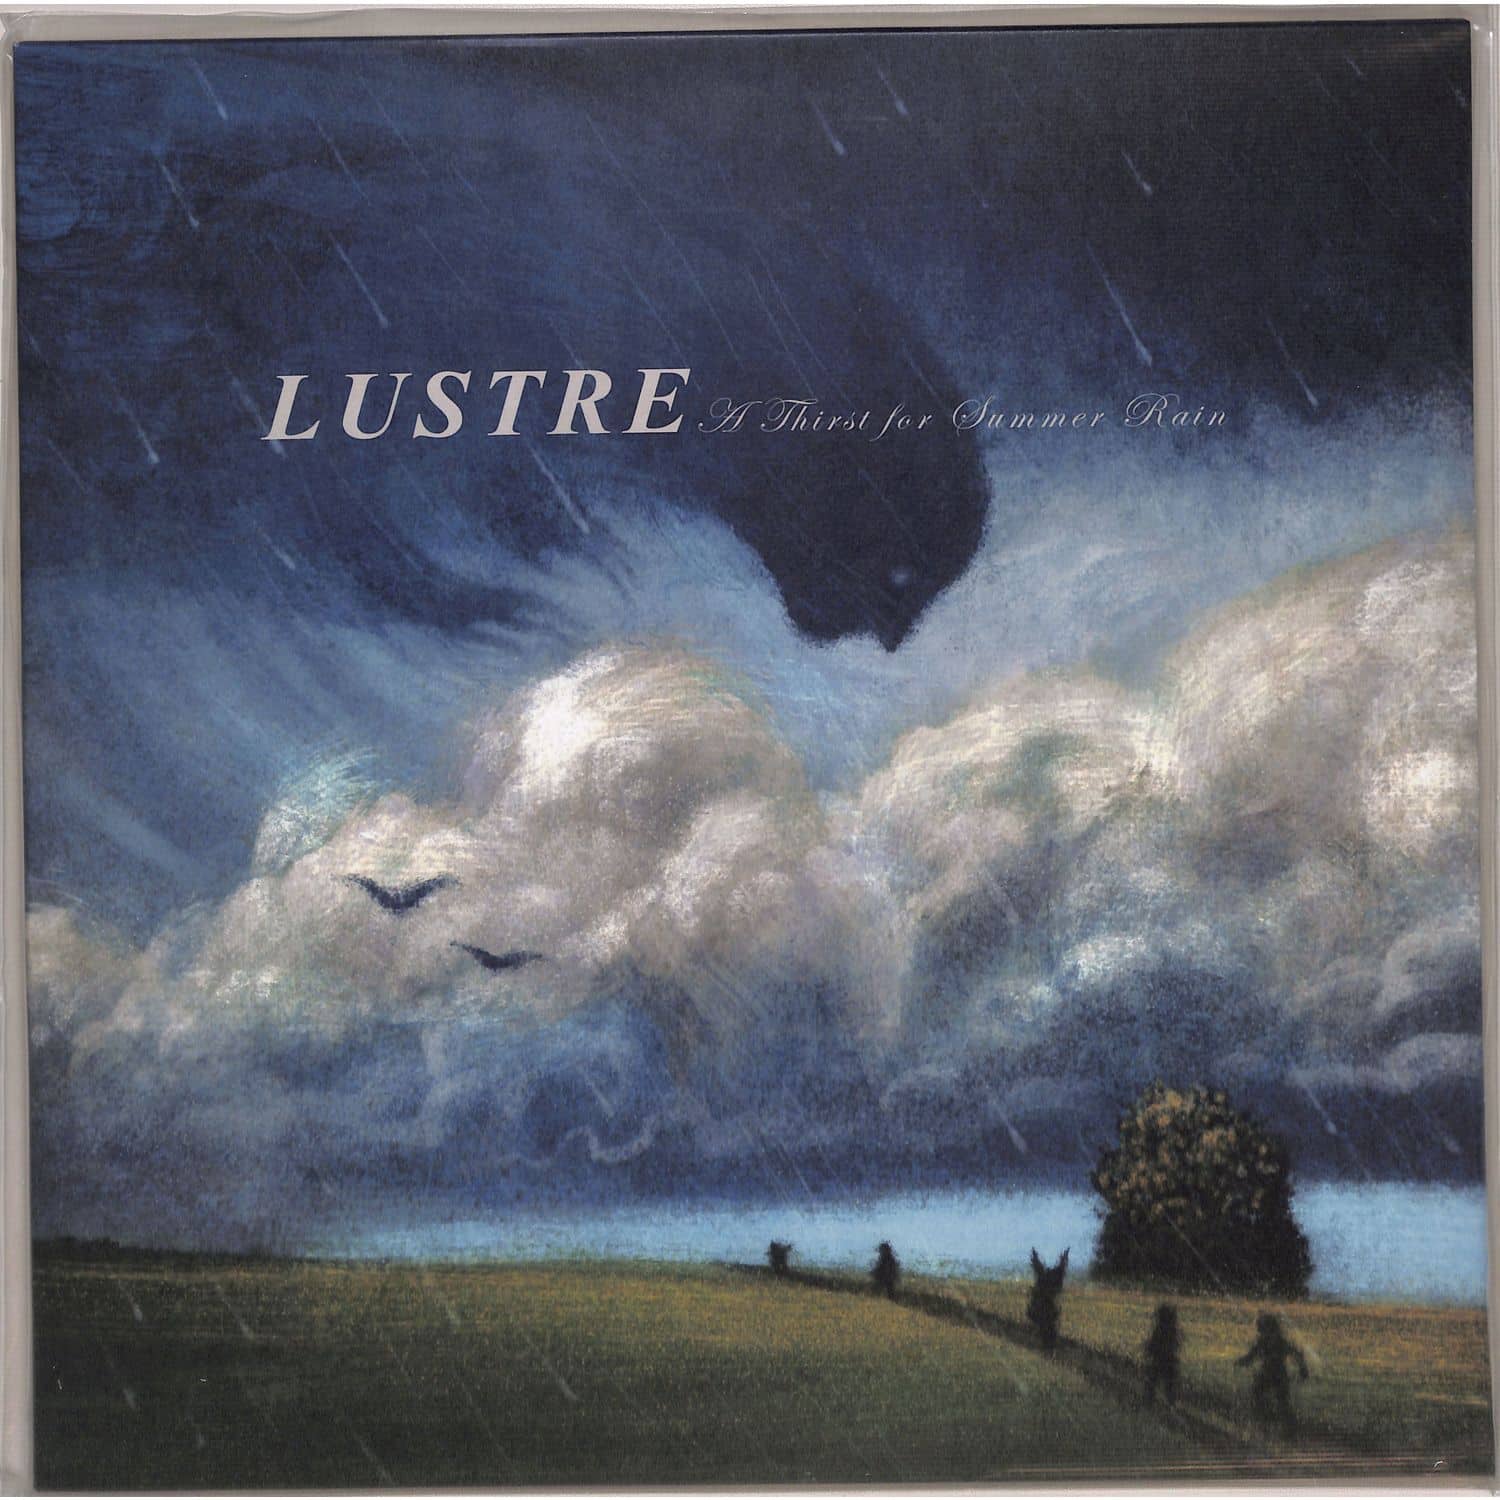 Lustre - A THIRST FOR SUMMER RAIN 